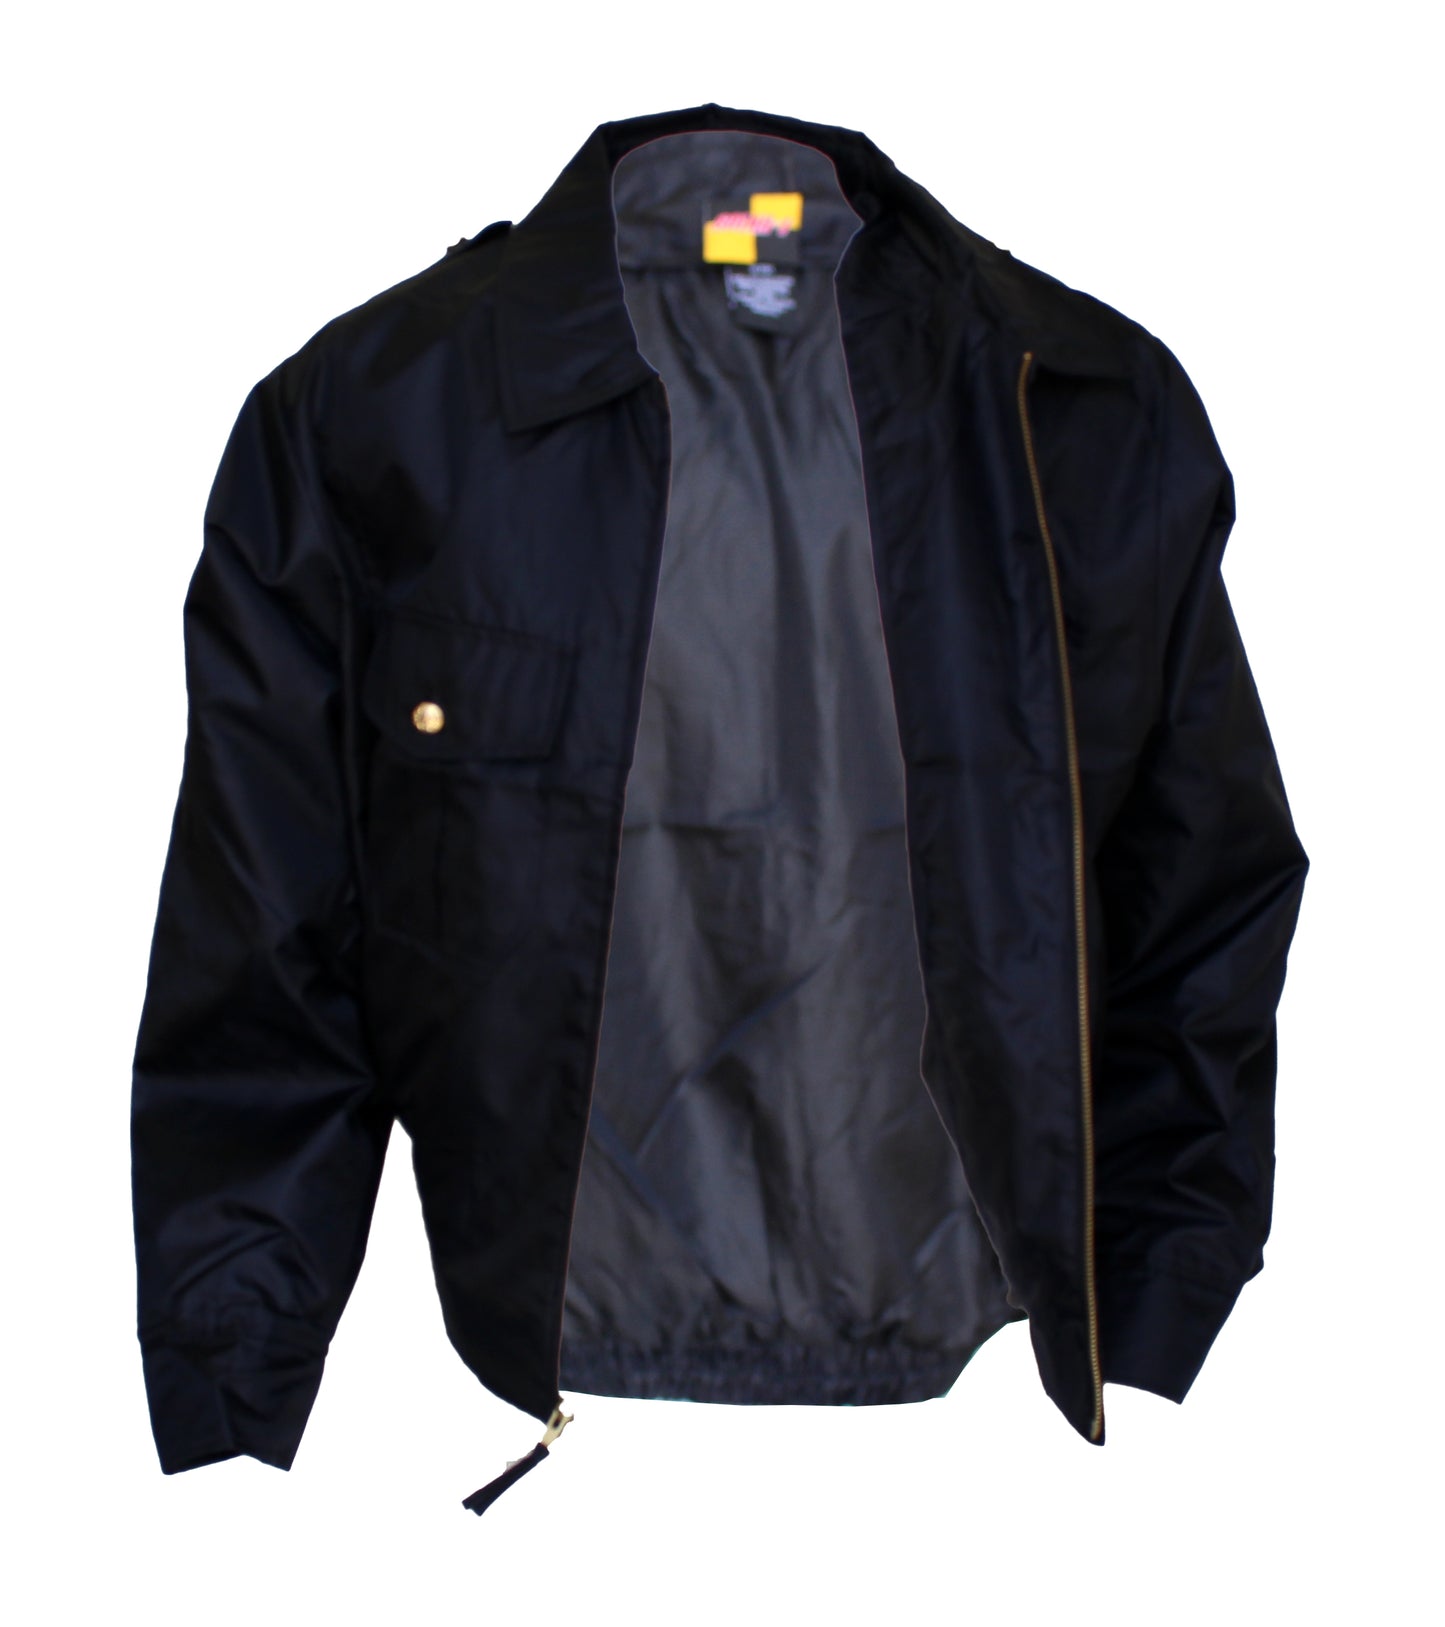 Solar 1 Clothing Police Nylon Windbreaker Duty Jacket with Removable Liner PW01